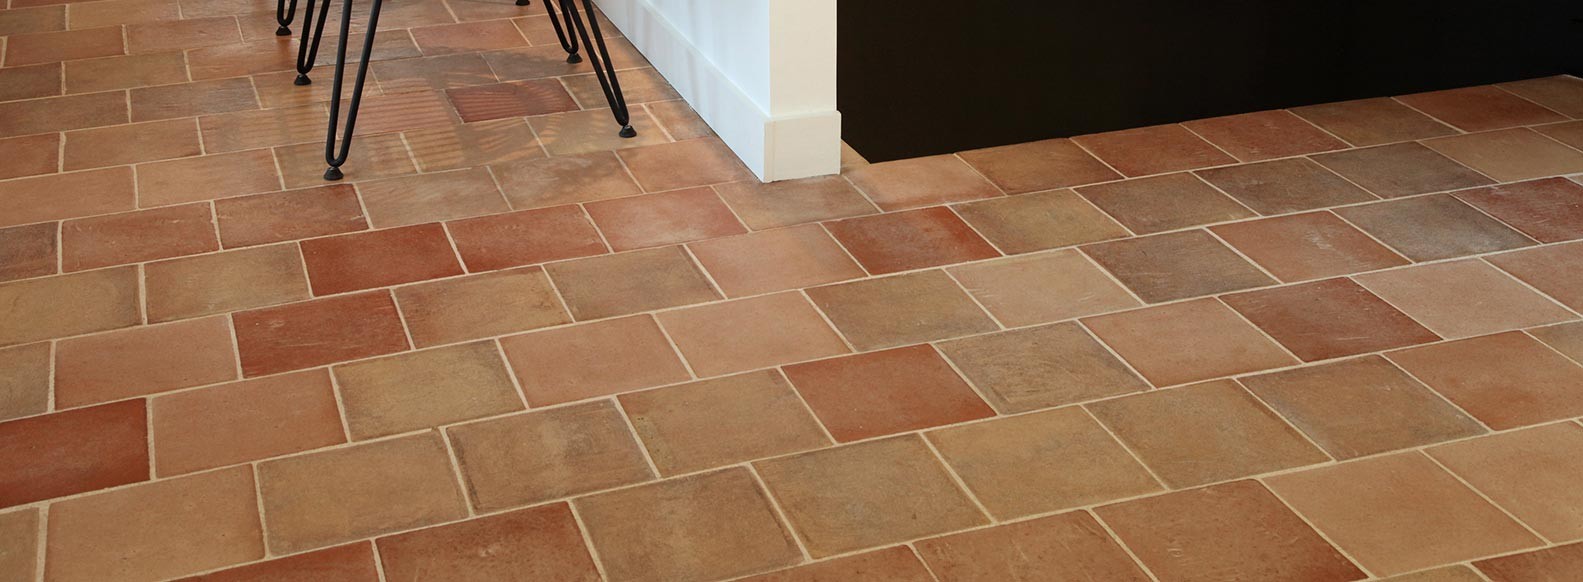 Tomette tiles, a natural material